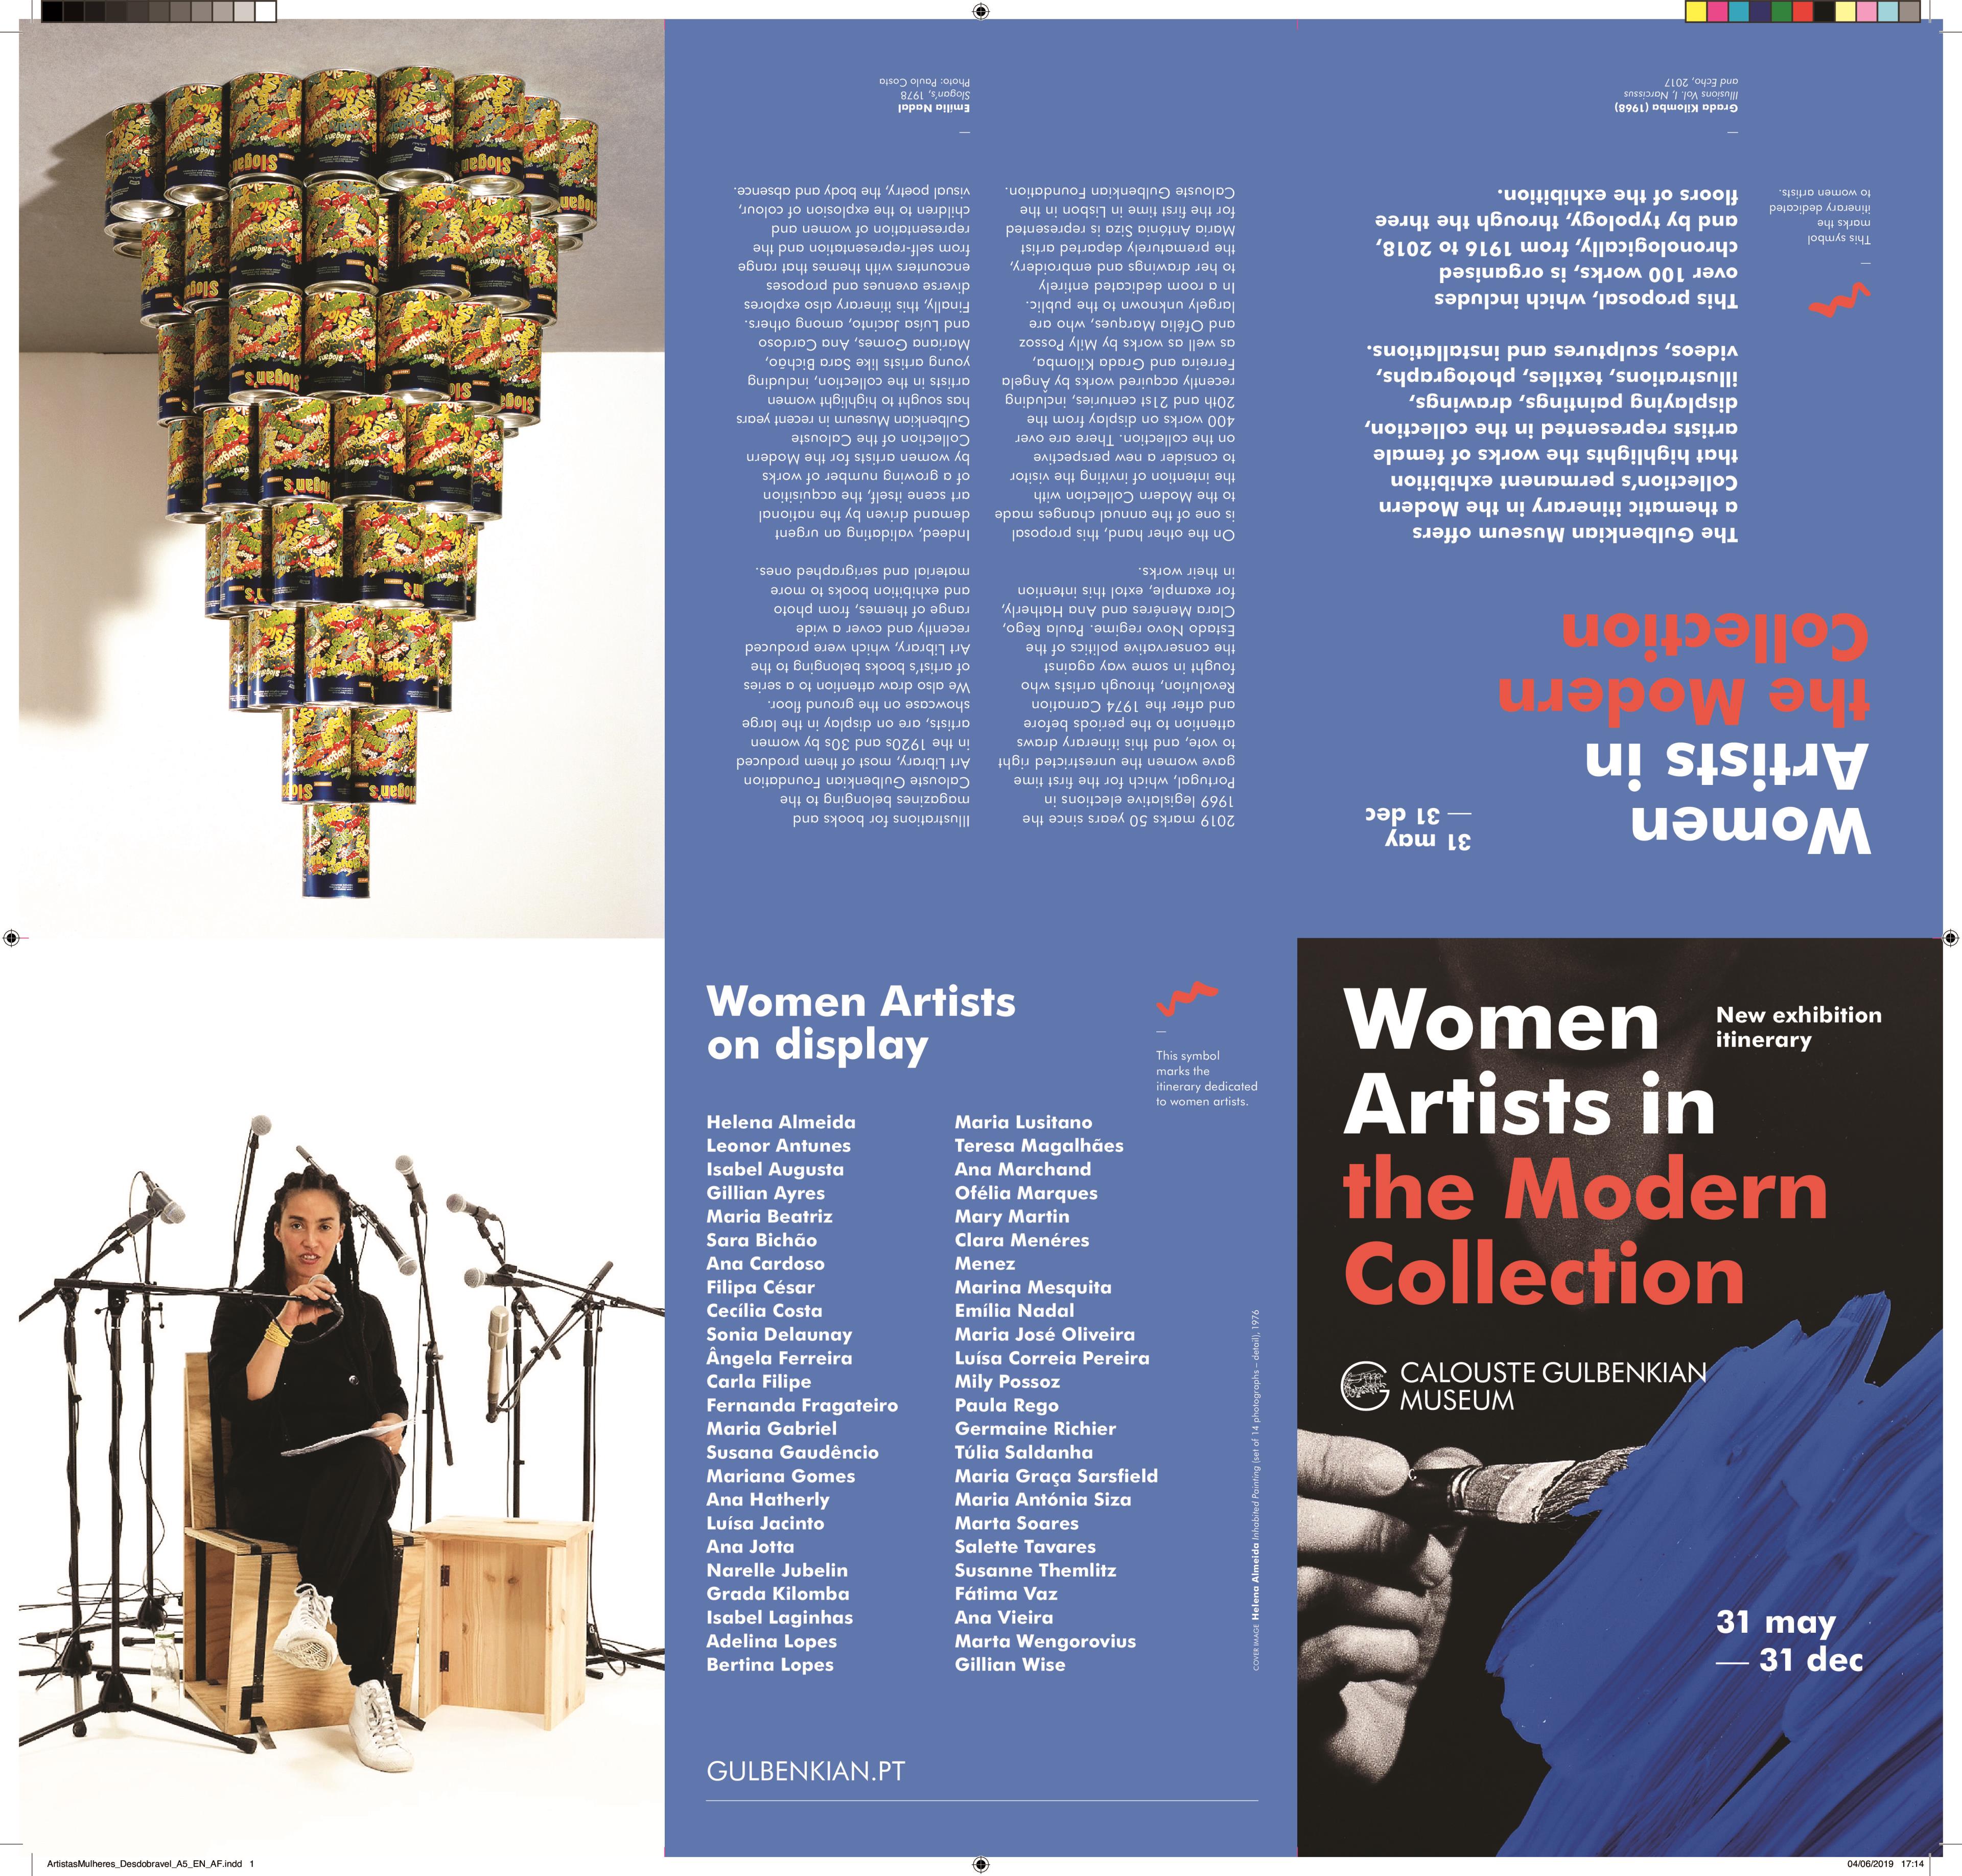 Women Artists in the Modern Collection